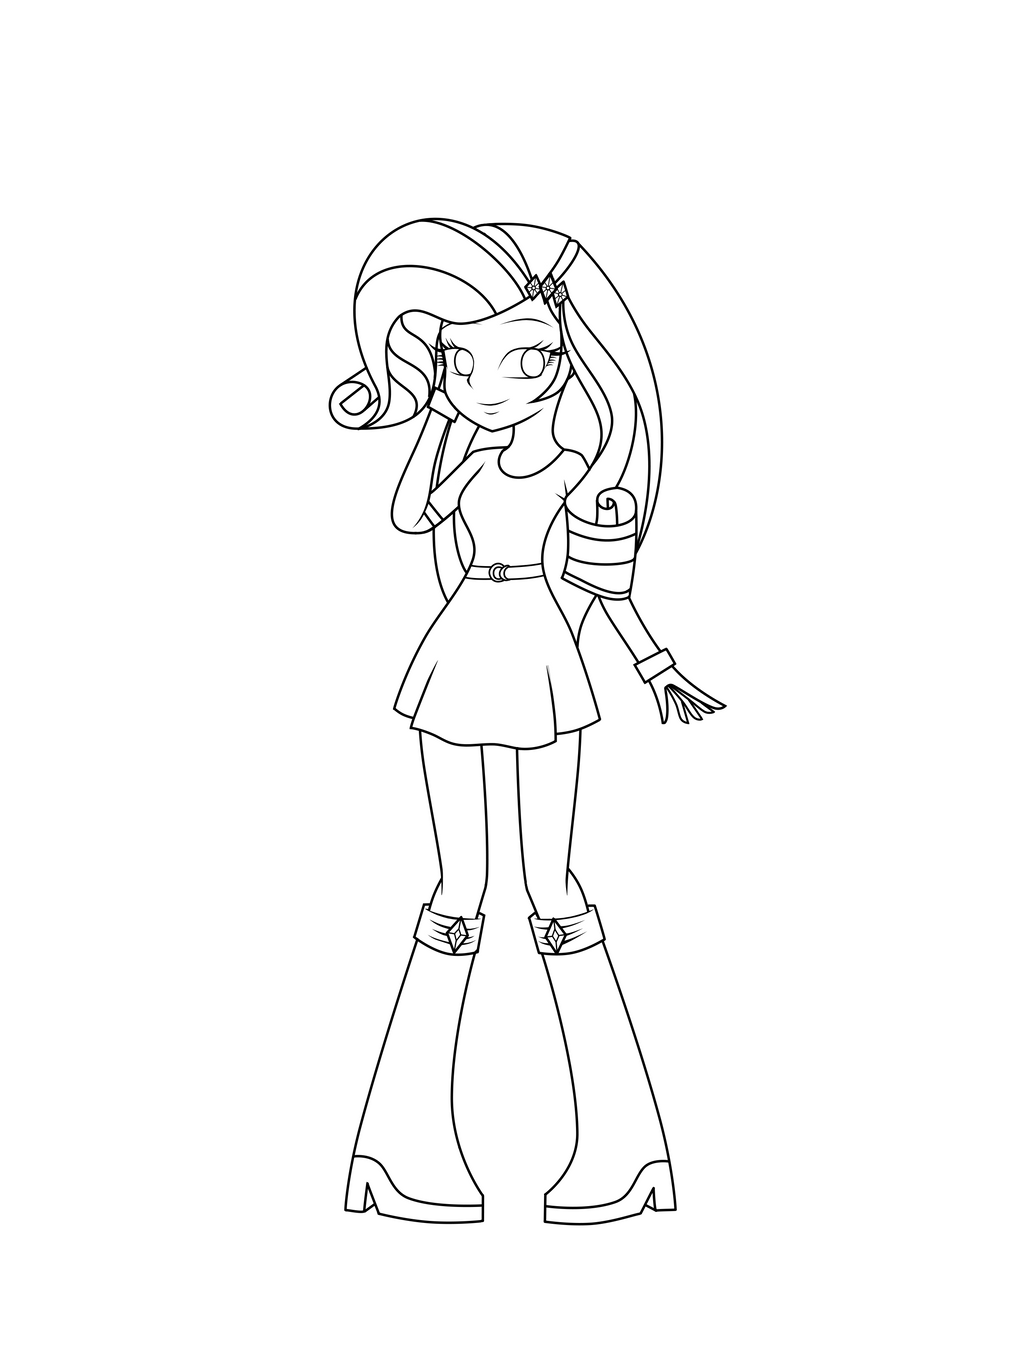  Equestria  Girls  Rarity  Lineart by DarkenGales on DeviantArt